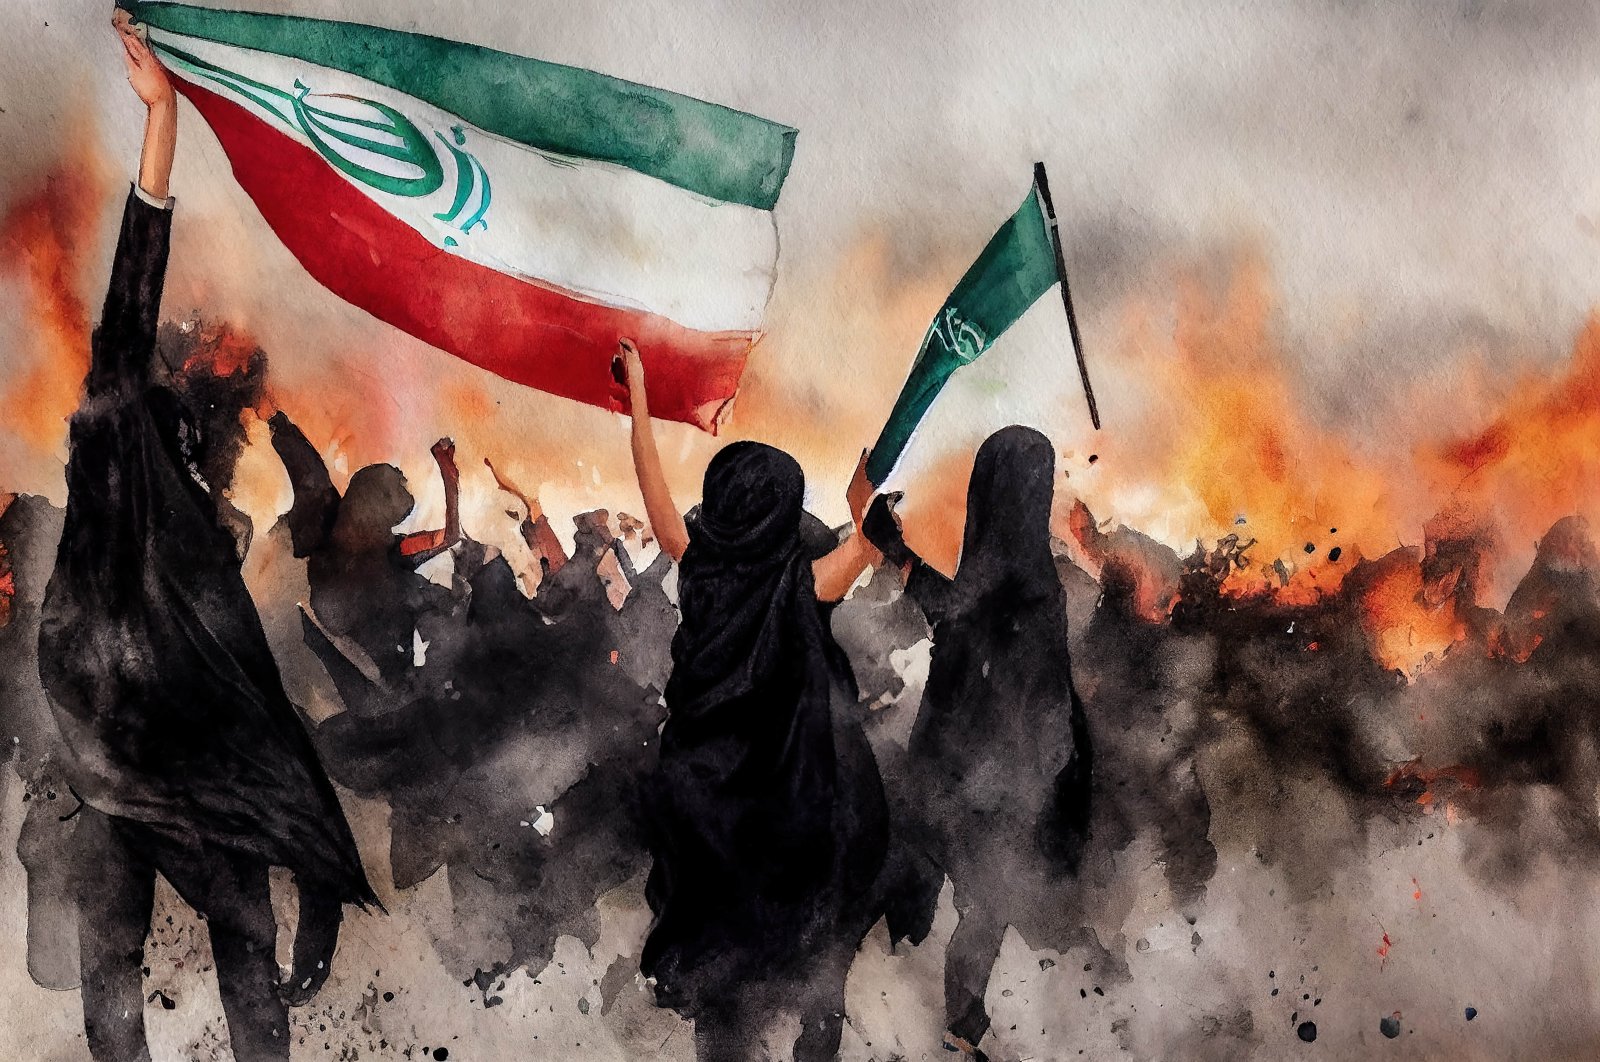 An illustration of people waving Iranian flags. (Shutterstock Photo)